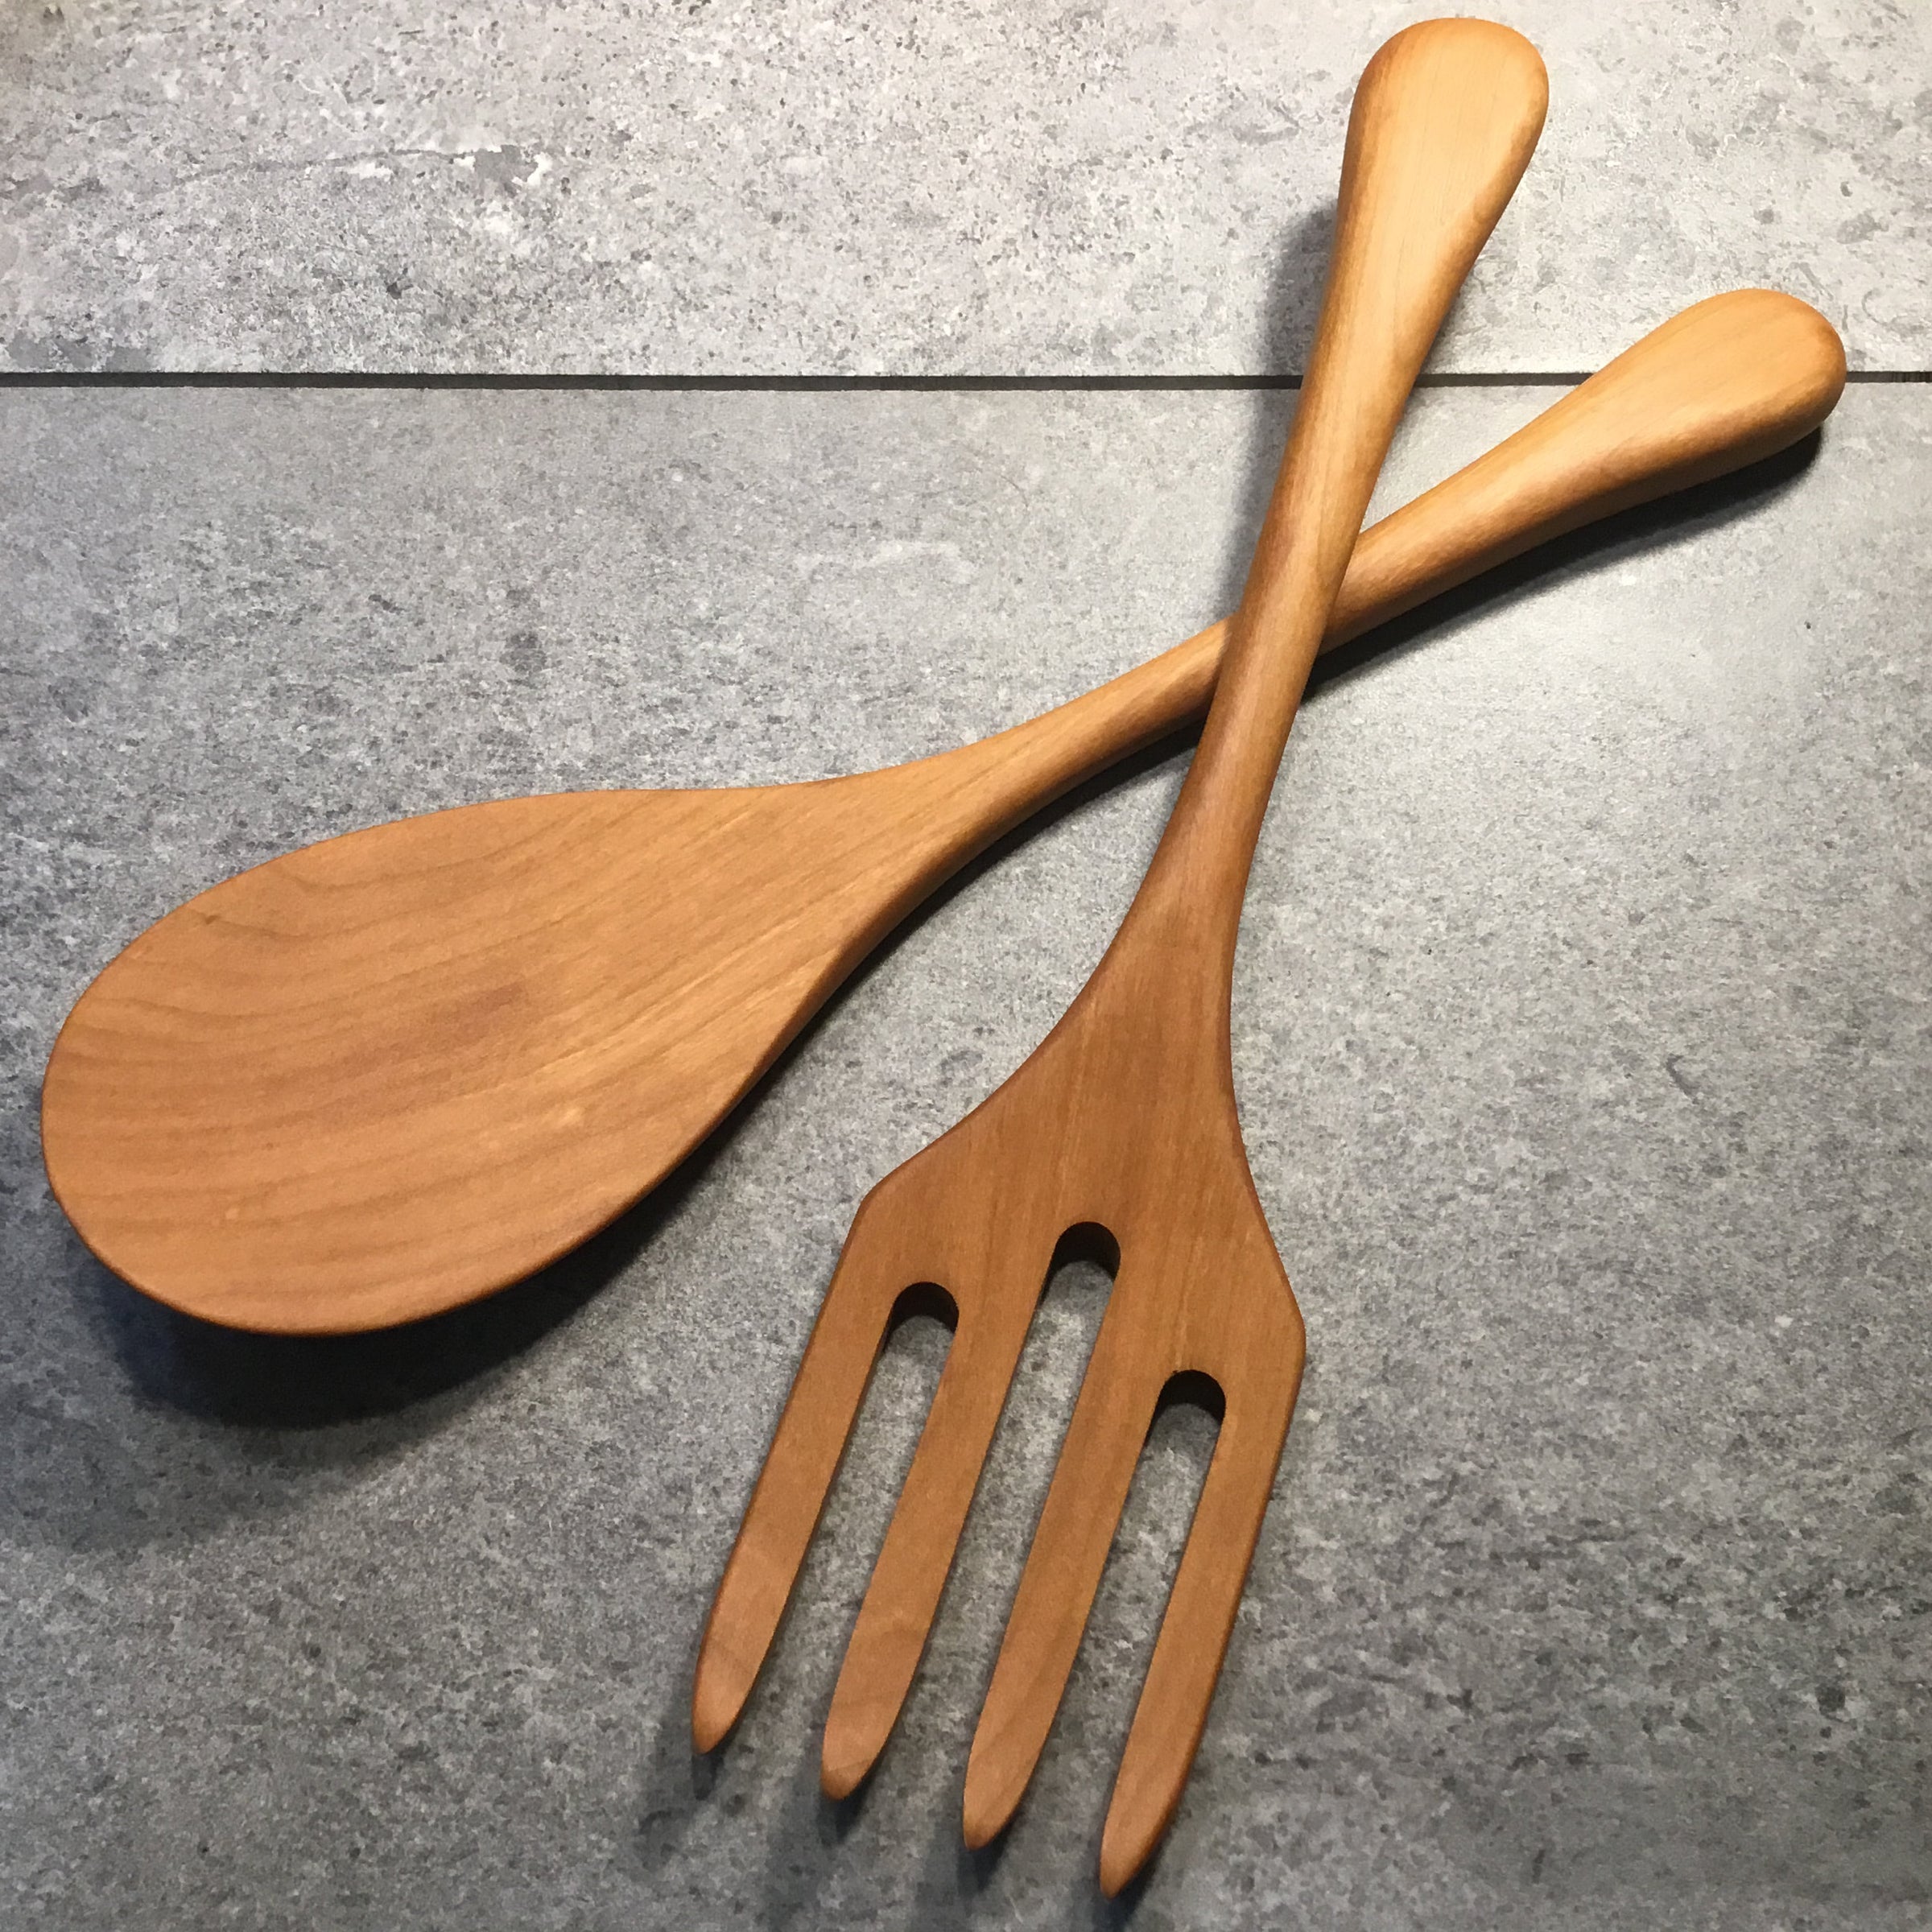 Handmade Kitchen Utensil Set 12 Wooden Spoon and Spatula Made in